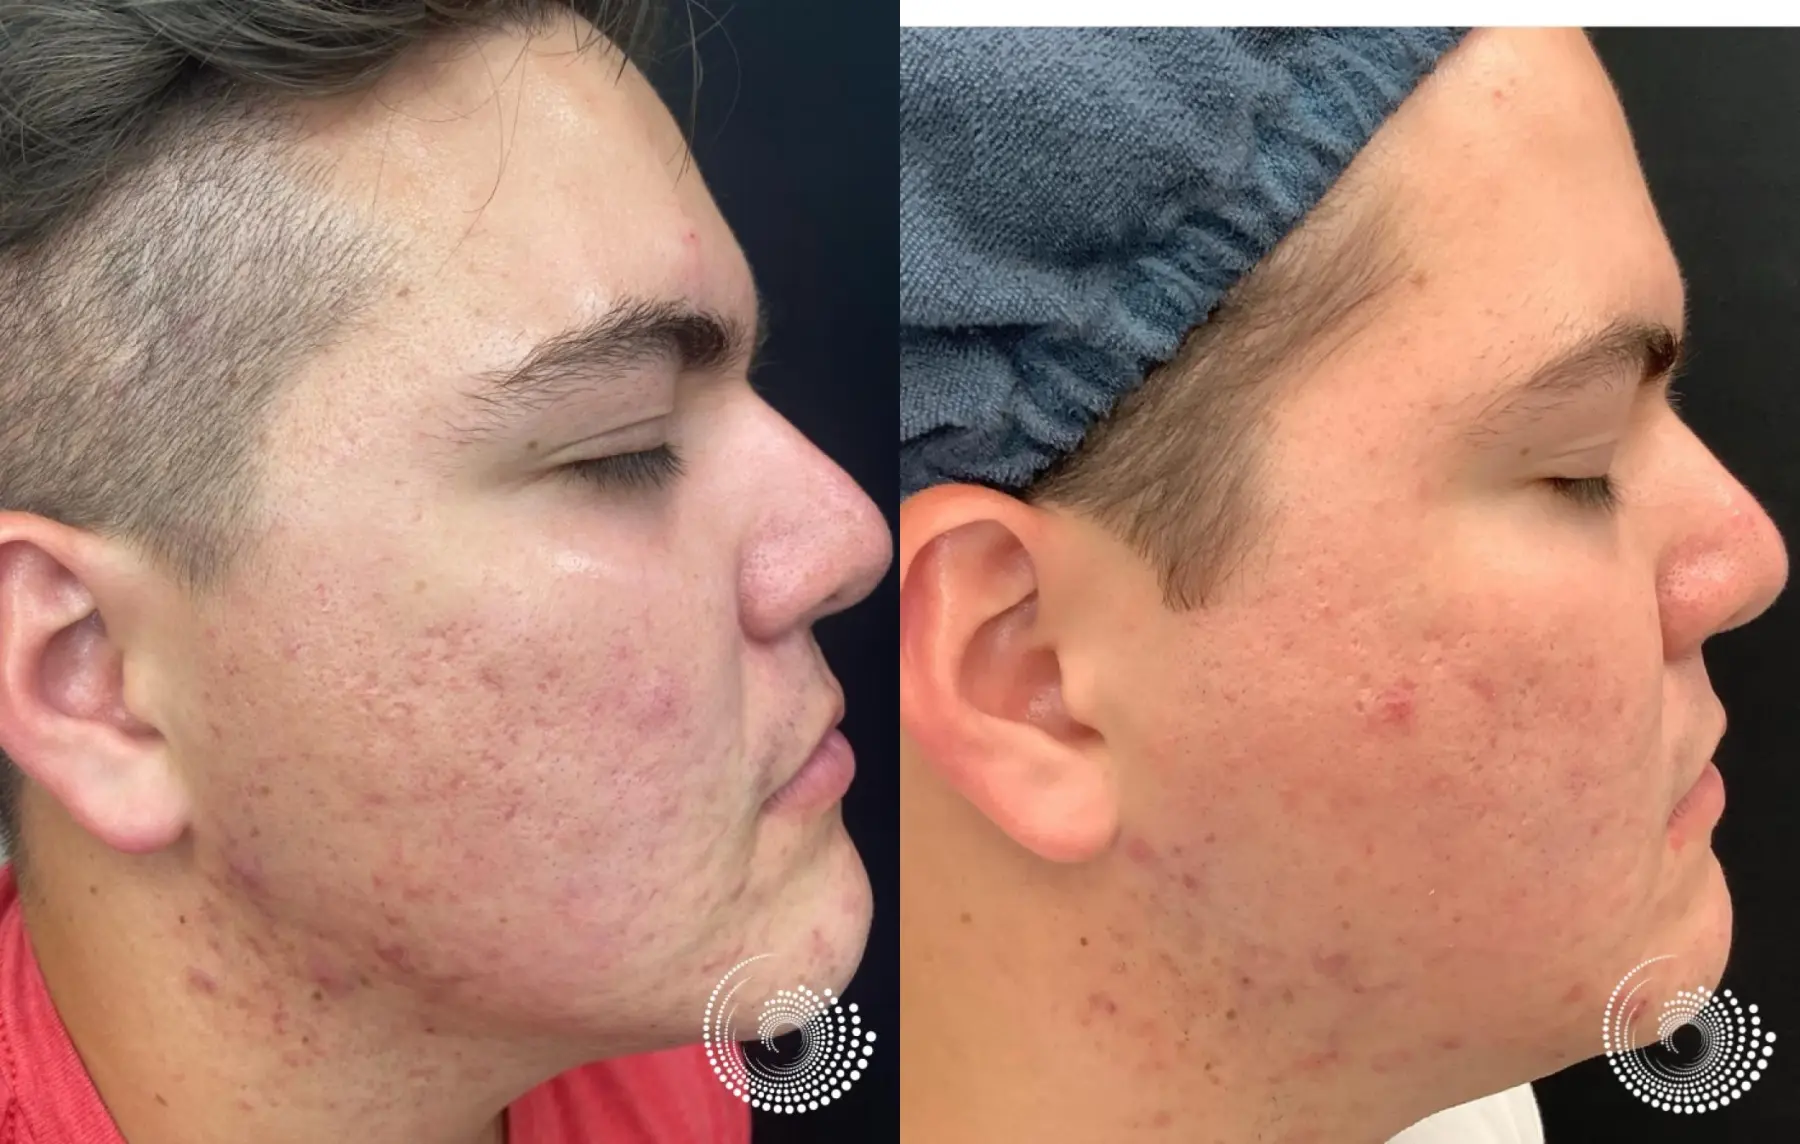 SkinPen Microneedling to smooth acne scars - Before and After 2